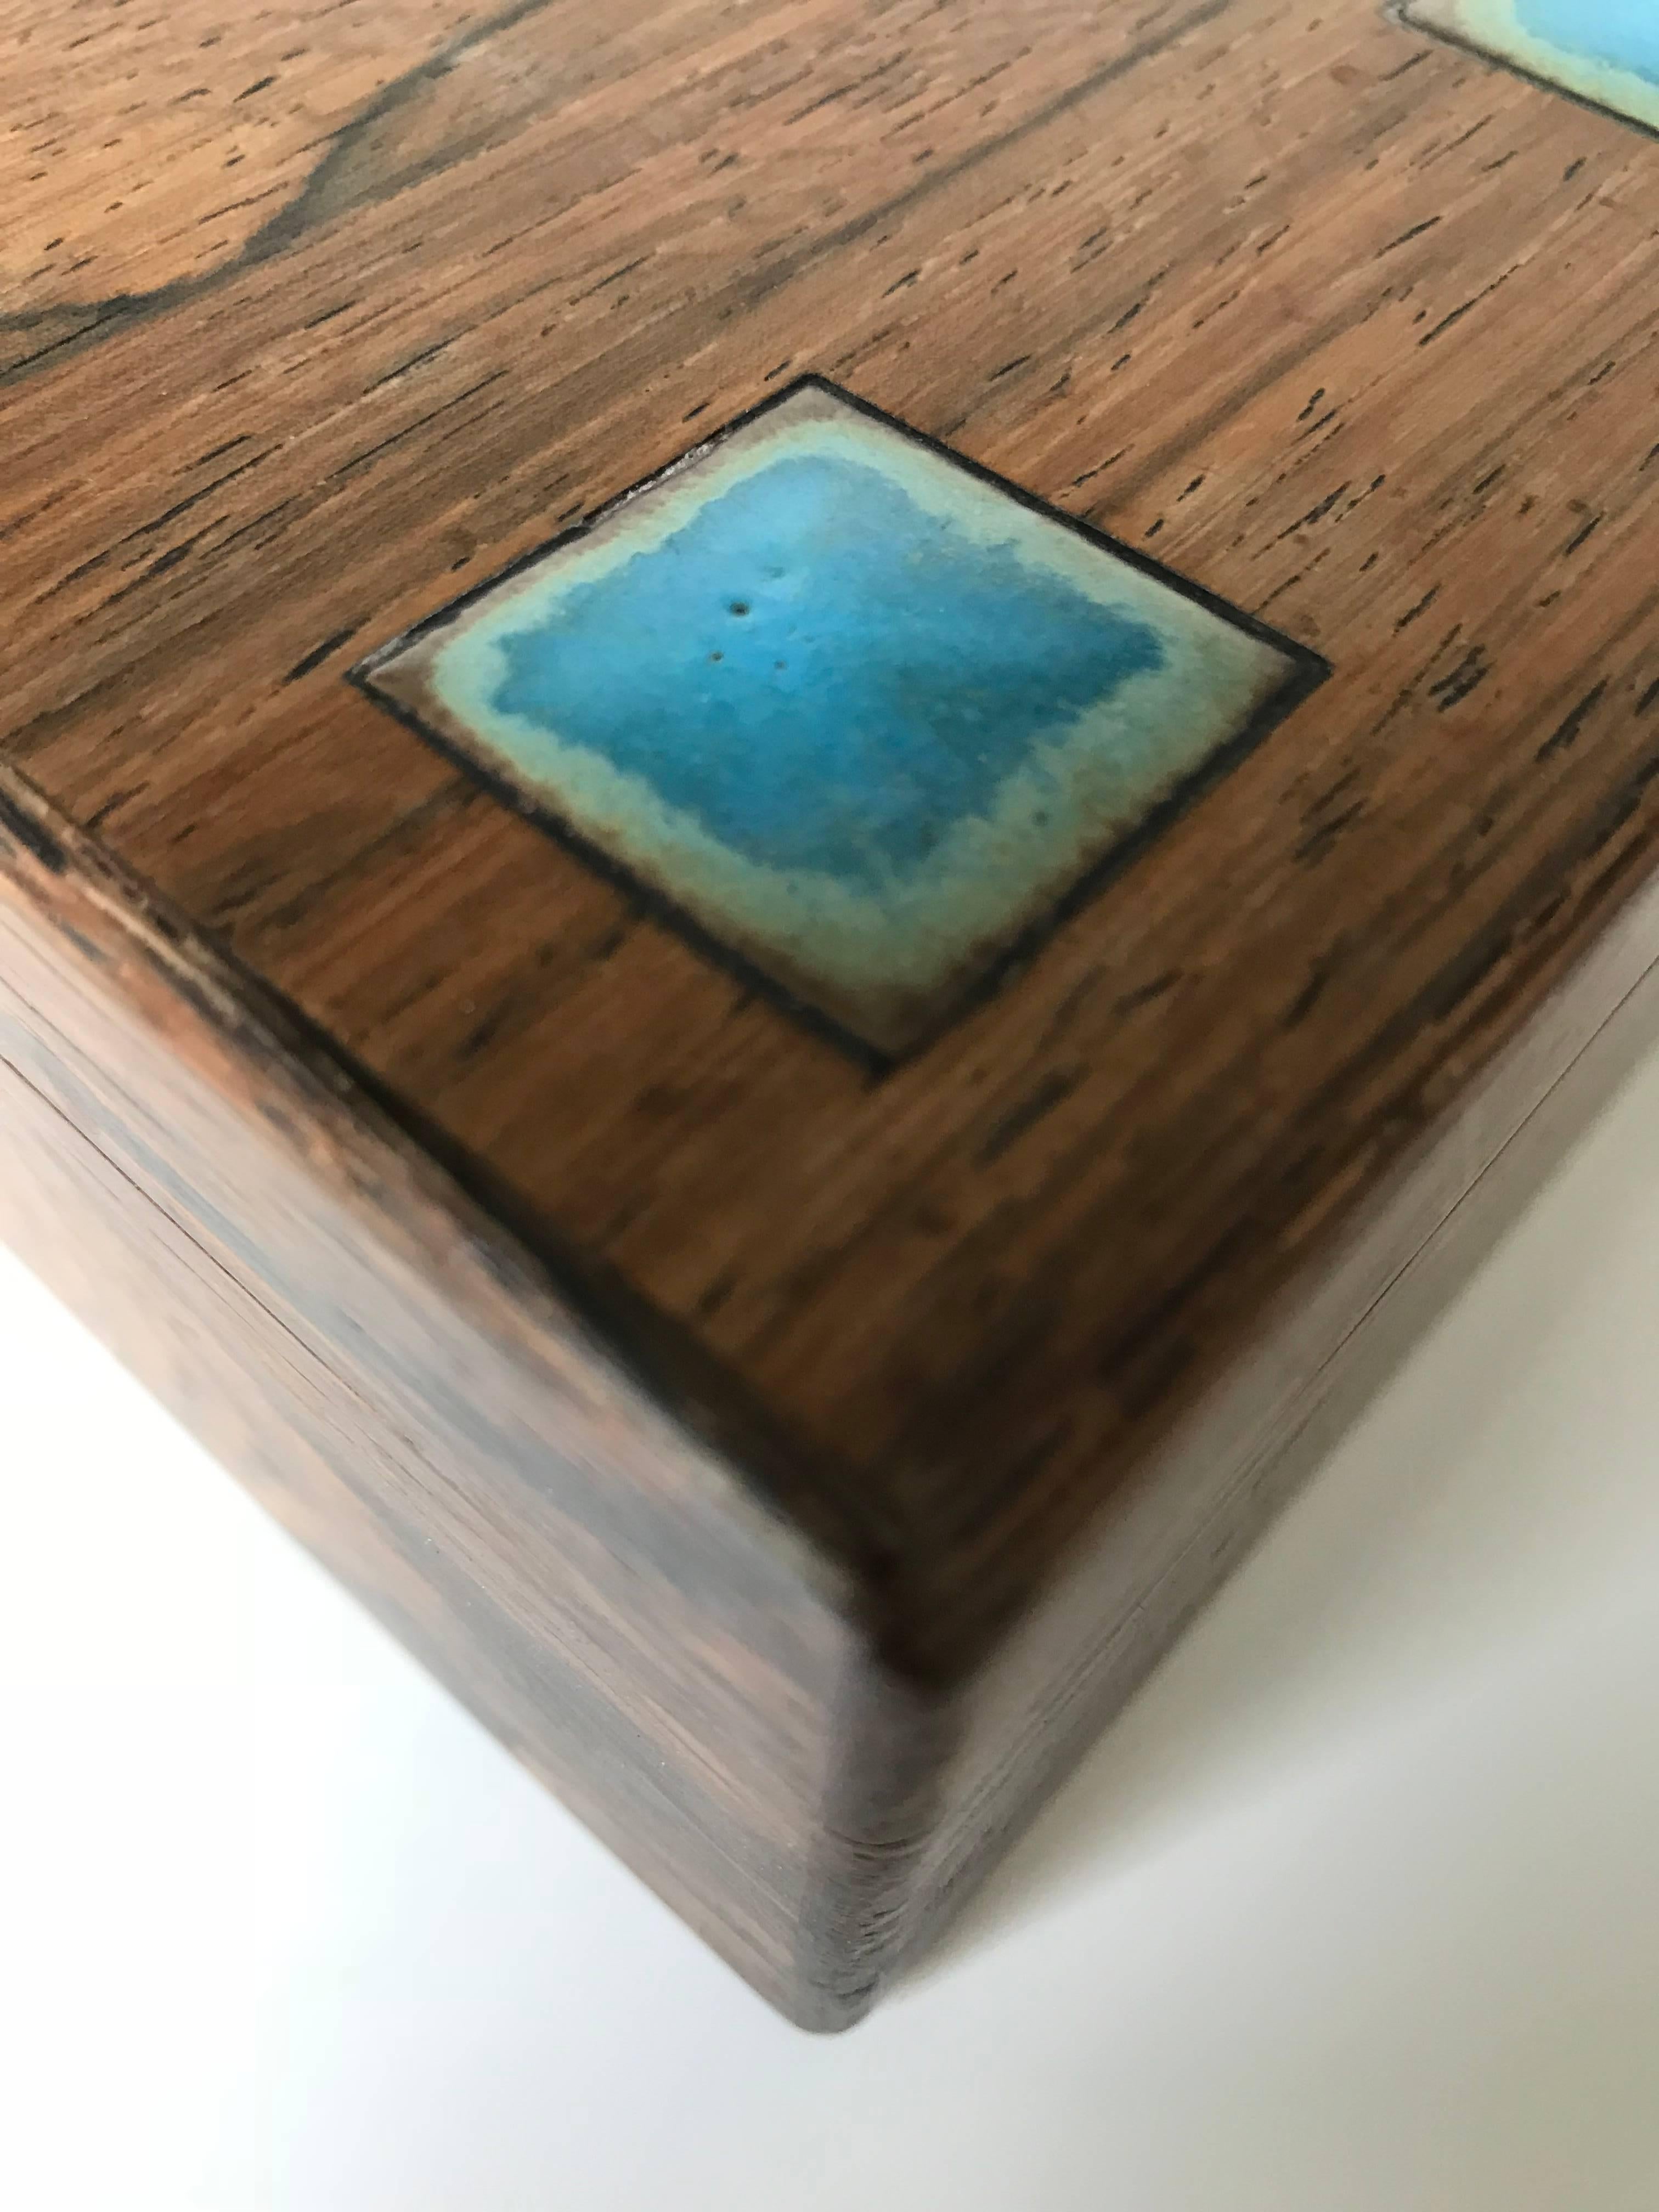 Beautiful midcentury craftsmanship box by Alfred Klitgaard.

This artistic design and all handcrafted square box of tropical hardwood is in excellent condition. We know that this one of a kind box is of a completely different era, but the colorful